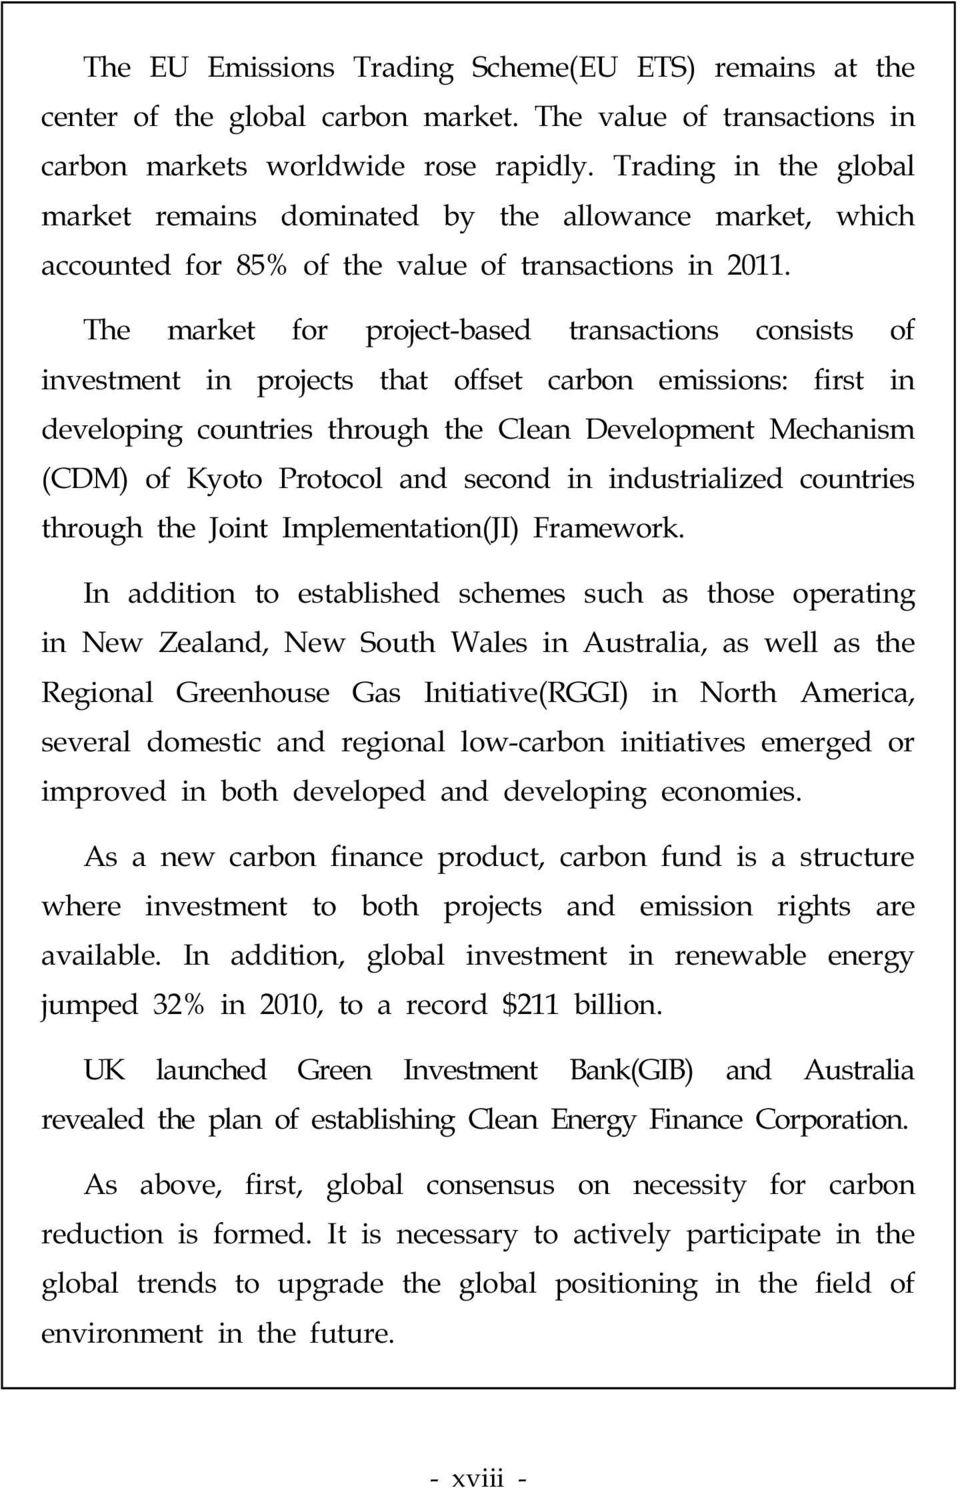 The market for project-based transactions consists of investment in projects that offset carbon emissions: first in developing countries through the Clean Development Mechanism (CDM) of Kyoto